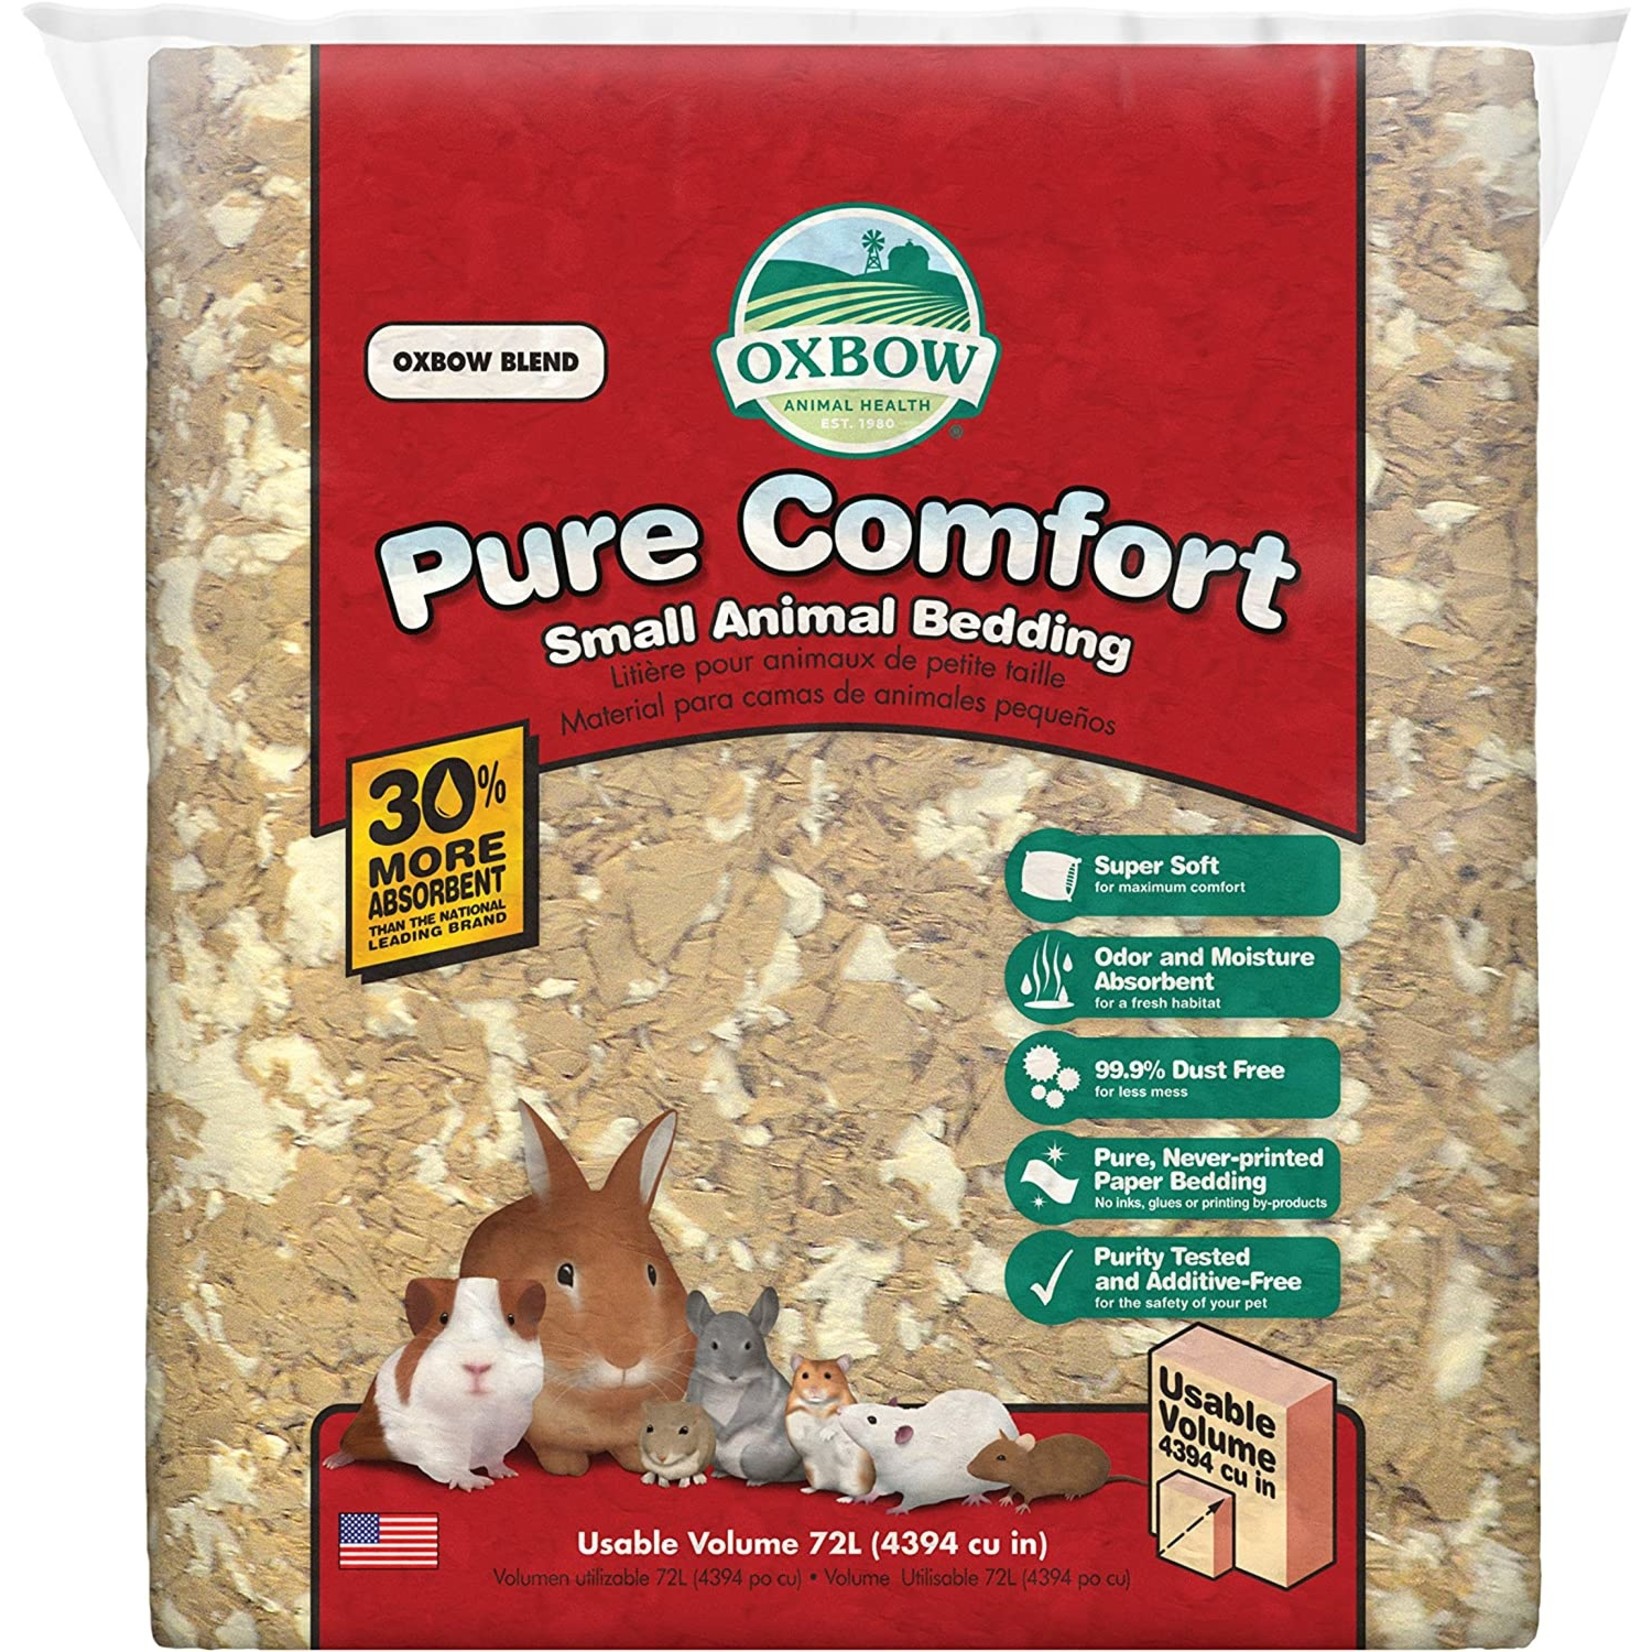 OXBOW Oxbow Pure Comfort Blend Bedding 72L